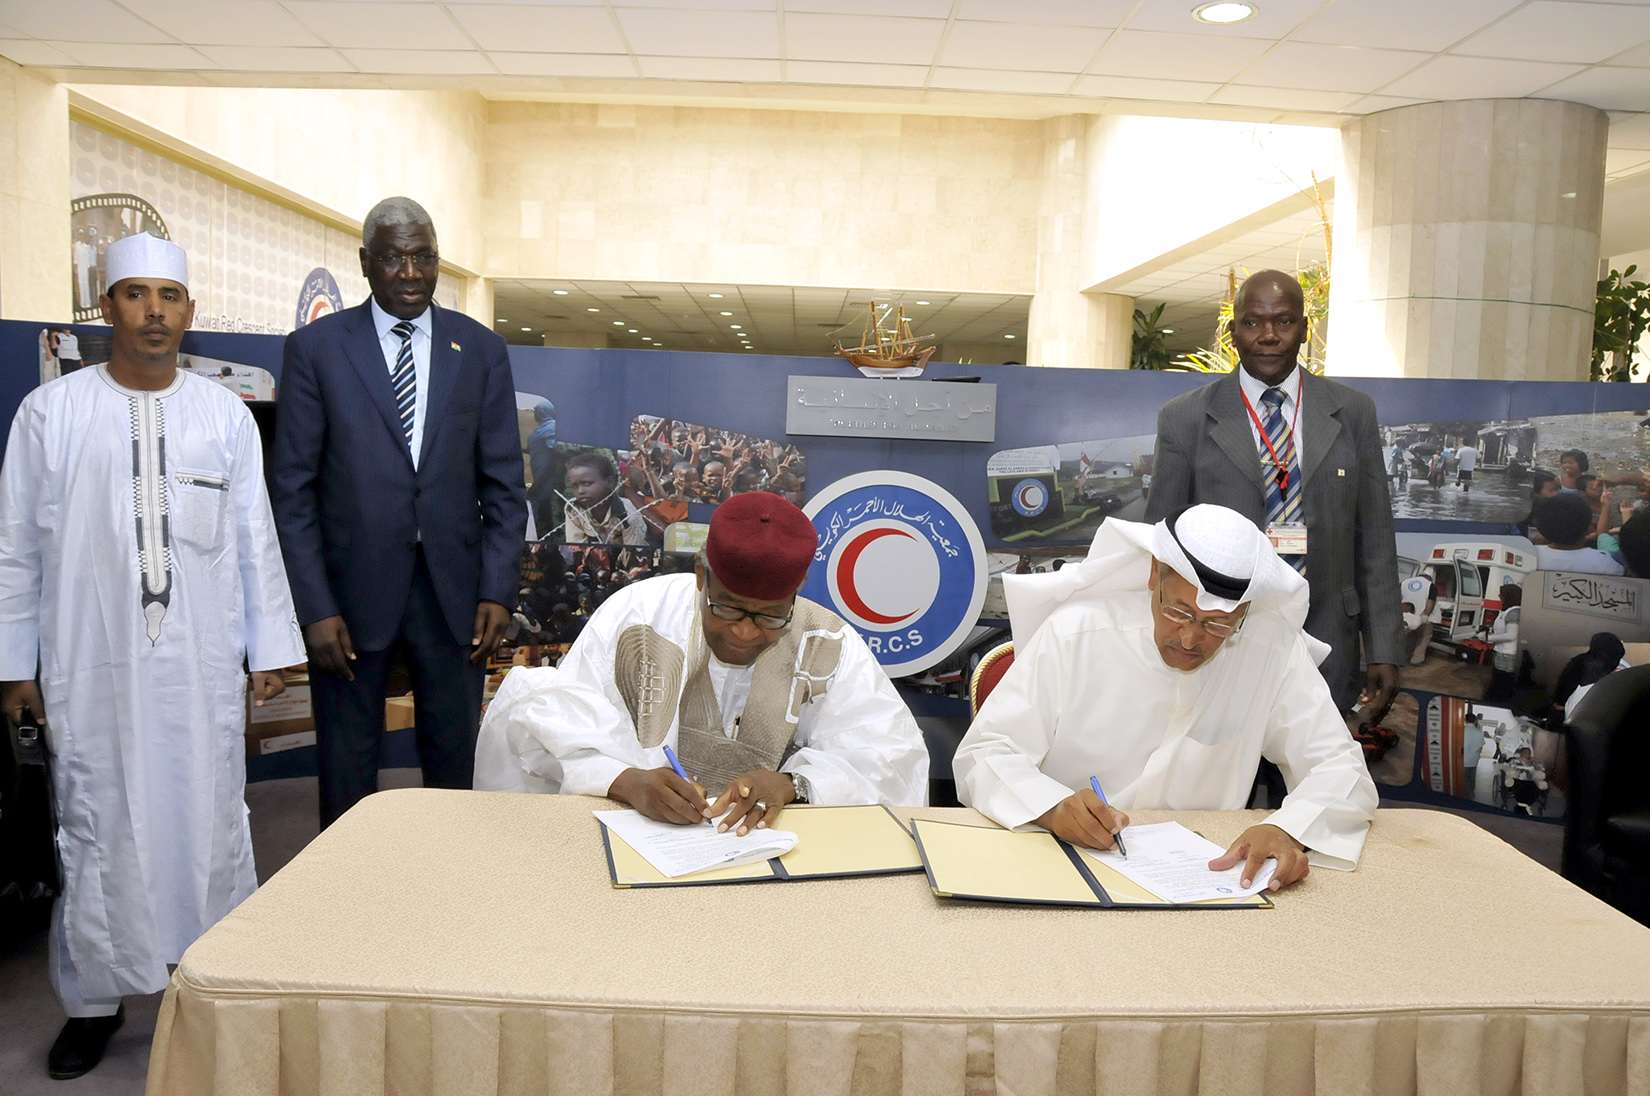 The ceremony of signing the cooperative agreement between Kuwait Red Crescent Society (KRCS) and Red Cross Society of Niger